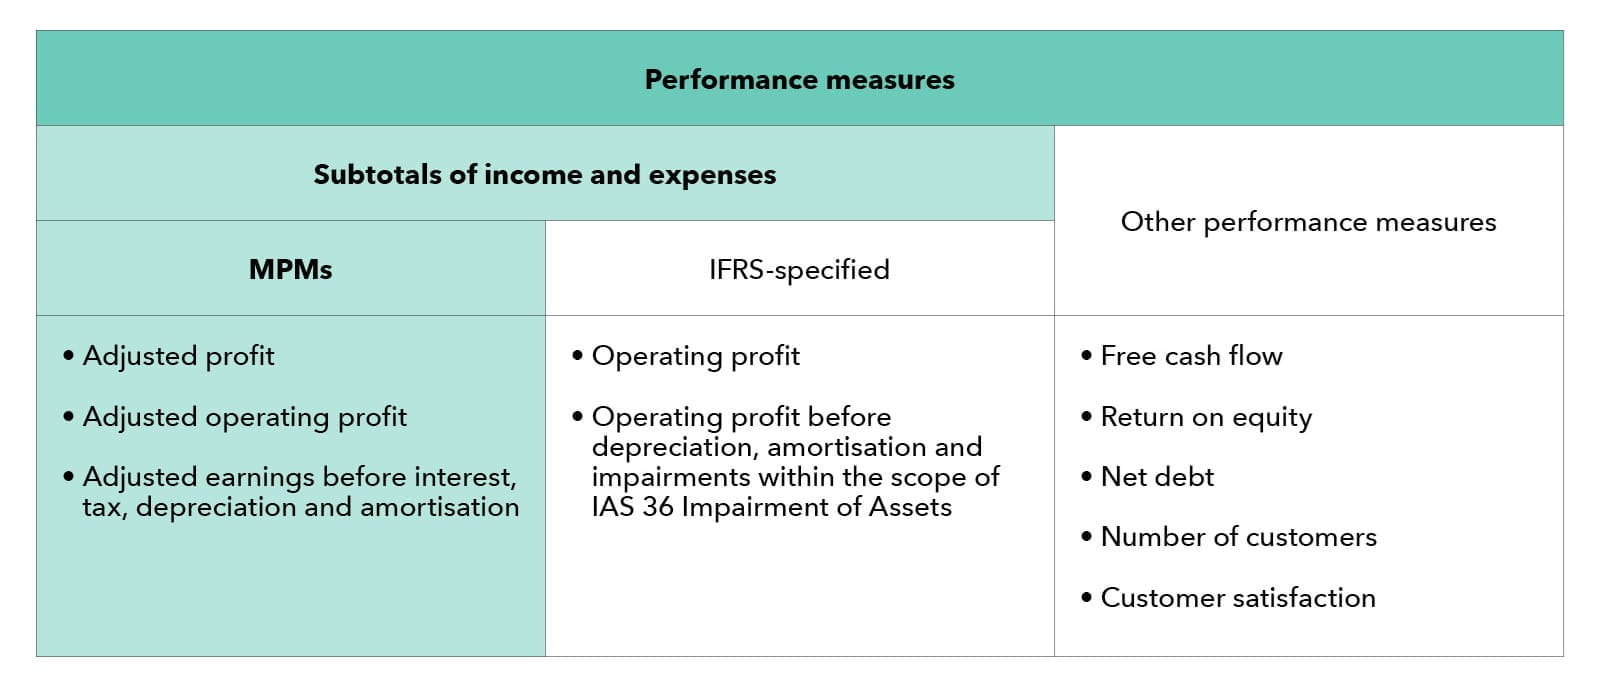 teal table IFRS corporate financial reporting By All Accounts